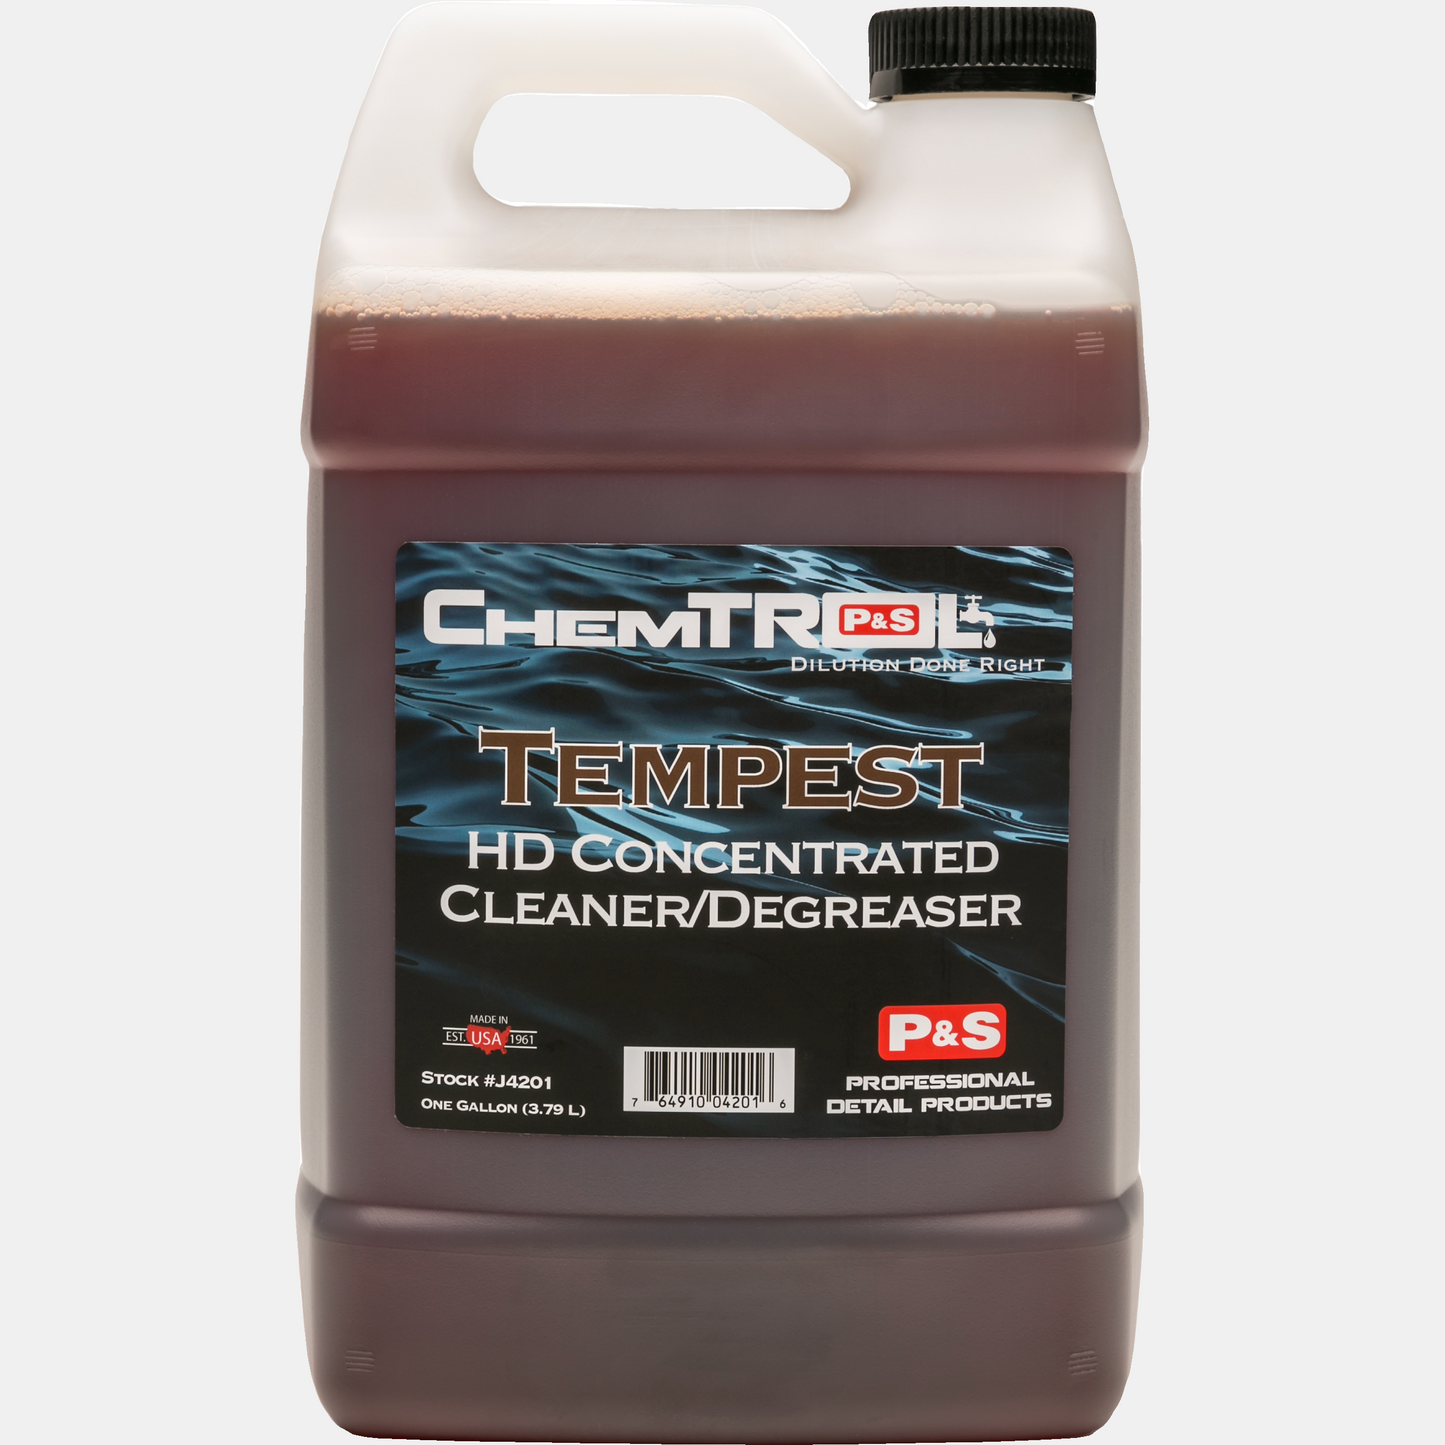 Tempest HD Concentrated Degreaser